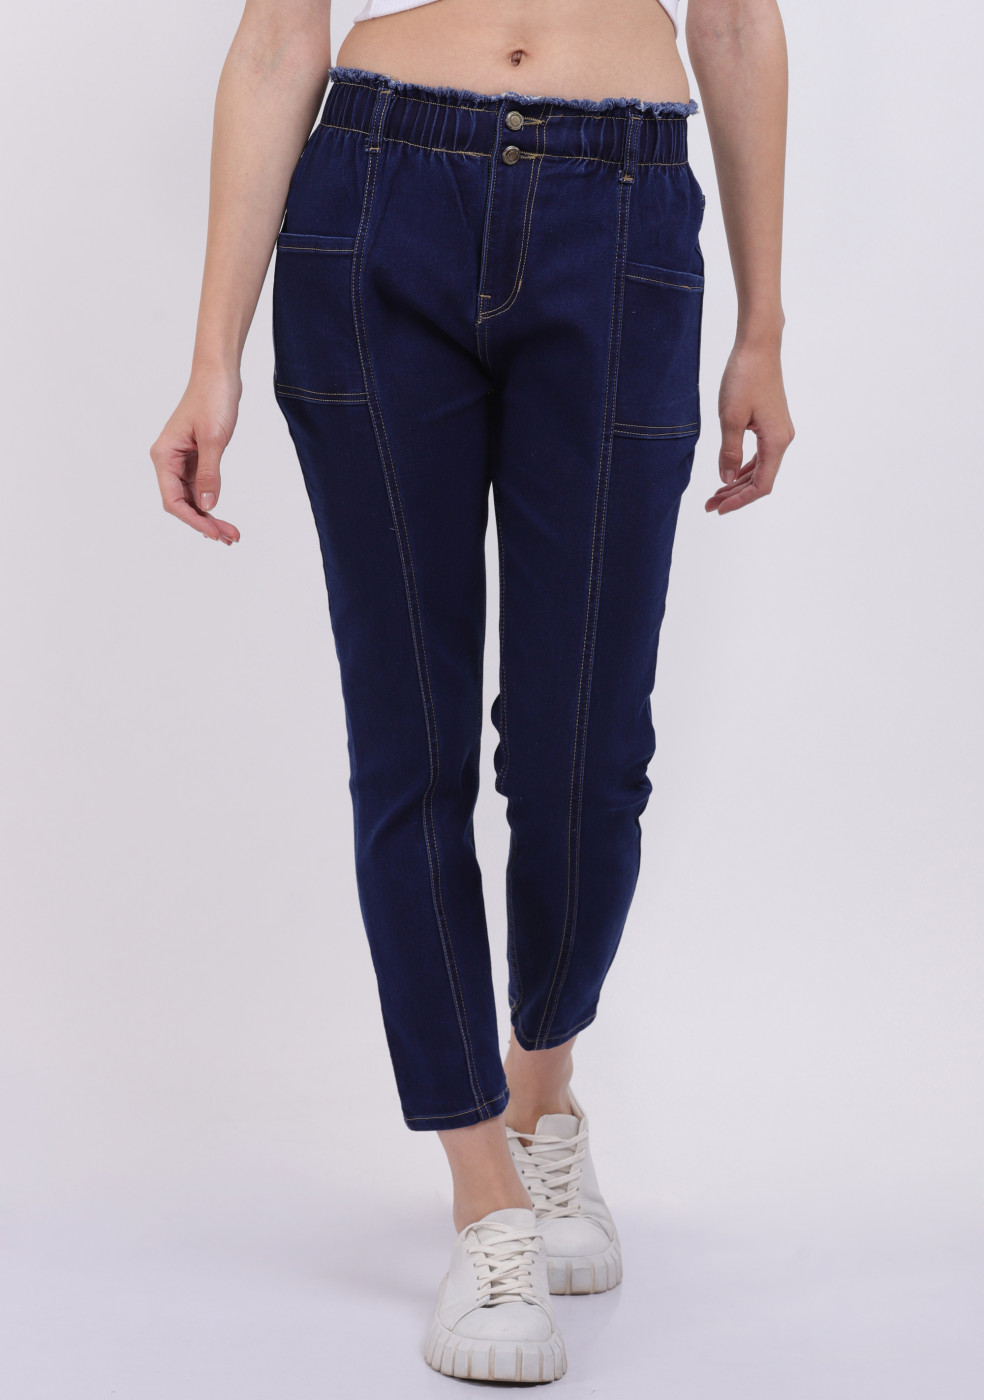 Buy online Navy Blue Comfortable Jeans For Women